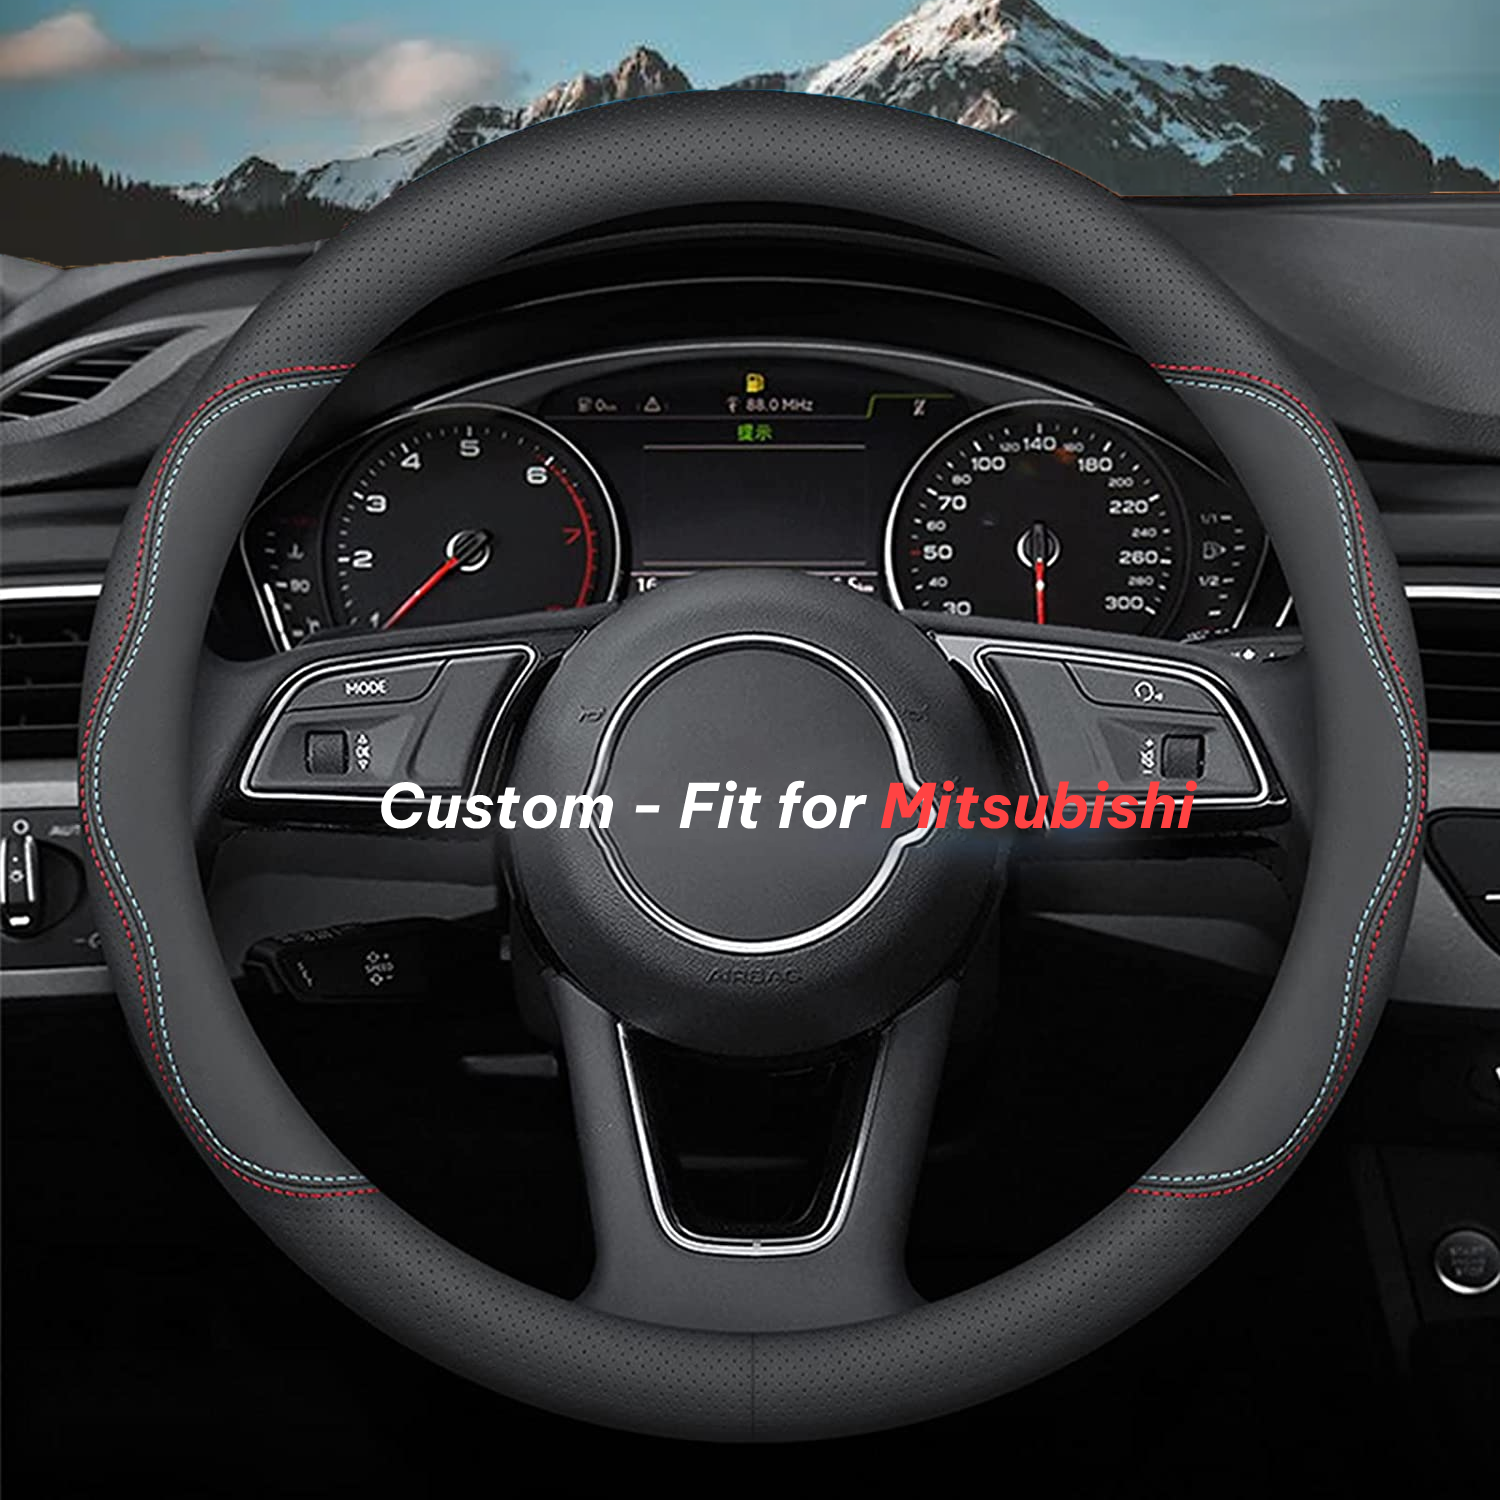 Car Steering Wheel Cover 2024 Update Version, Custom-Fit for Car, Premium Leather Car Steering Wheel Cover with Logo, Car Accessories DLNS222